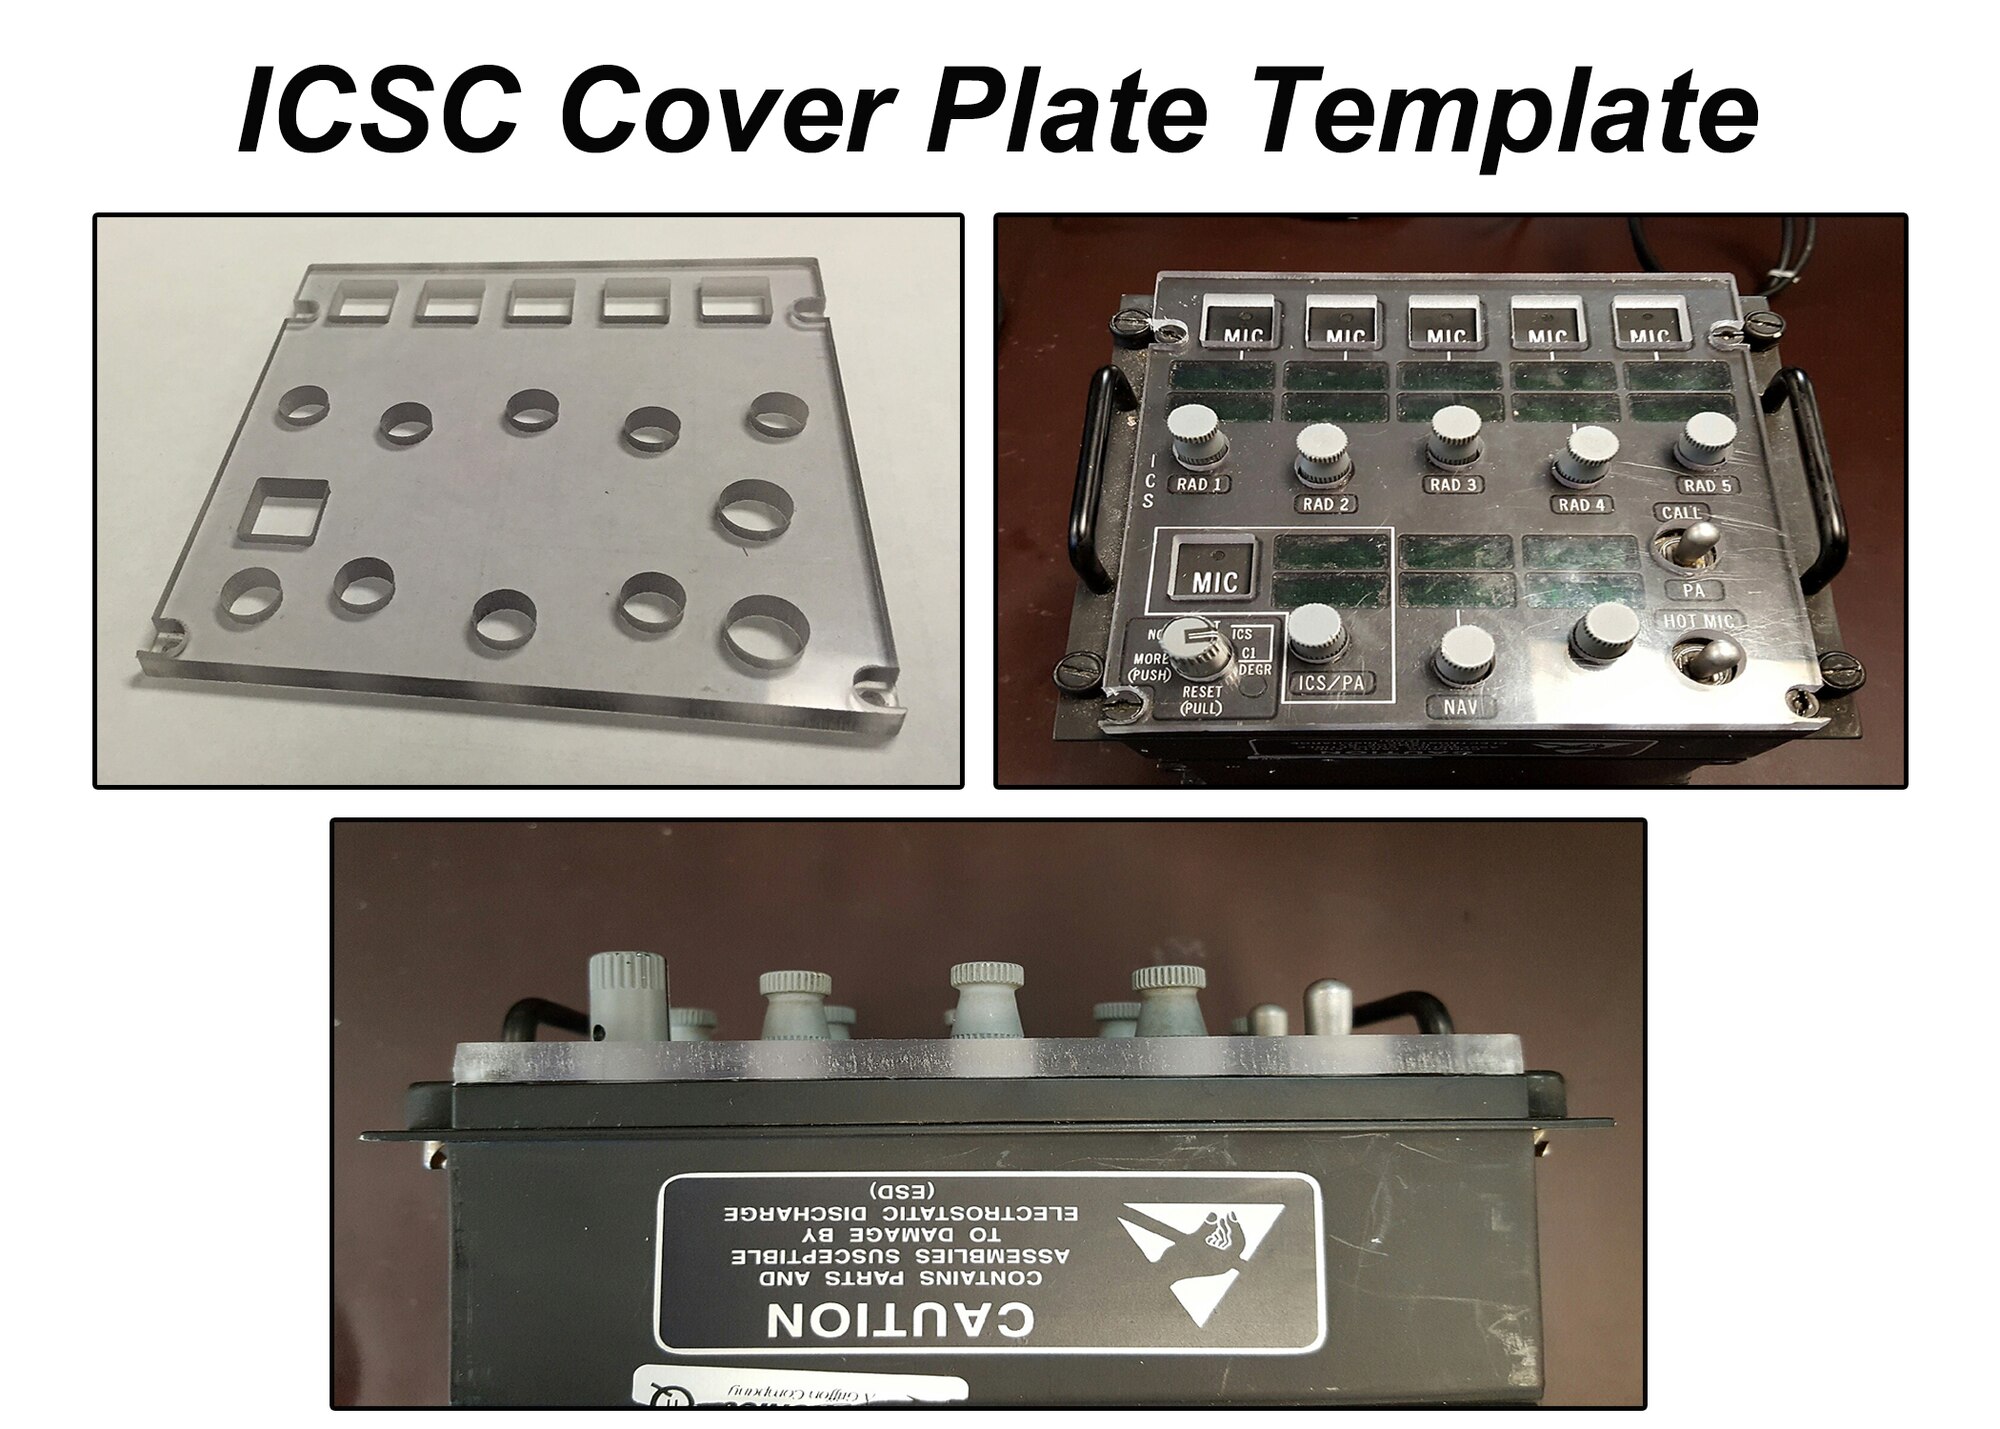 The Inter-Communication Set Controller cover plate, is a sheet of polycarbonate material that fits over the front panel of the Inter-Communication Set Controller. The ICSC cover plate is used to protect the ICSC front panels fragile glass displays and control knobs against seatbelts, aircrew iPads, boots, oxygen masks, aircrew and maintenance personnel, and any other item that can damage it. If approved for use, the ICSC cover plate could save $19,000 in potential ICSC front panel damages and replacements. (U.S Air Force graphic/Senior Airman Divine Cox)